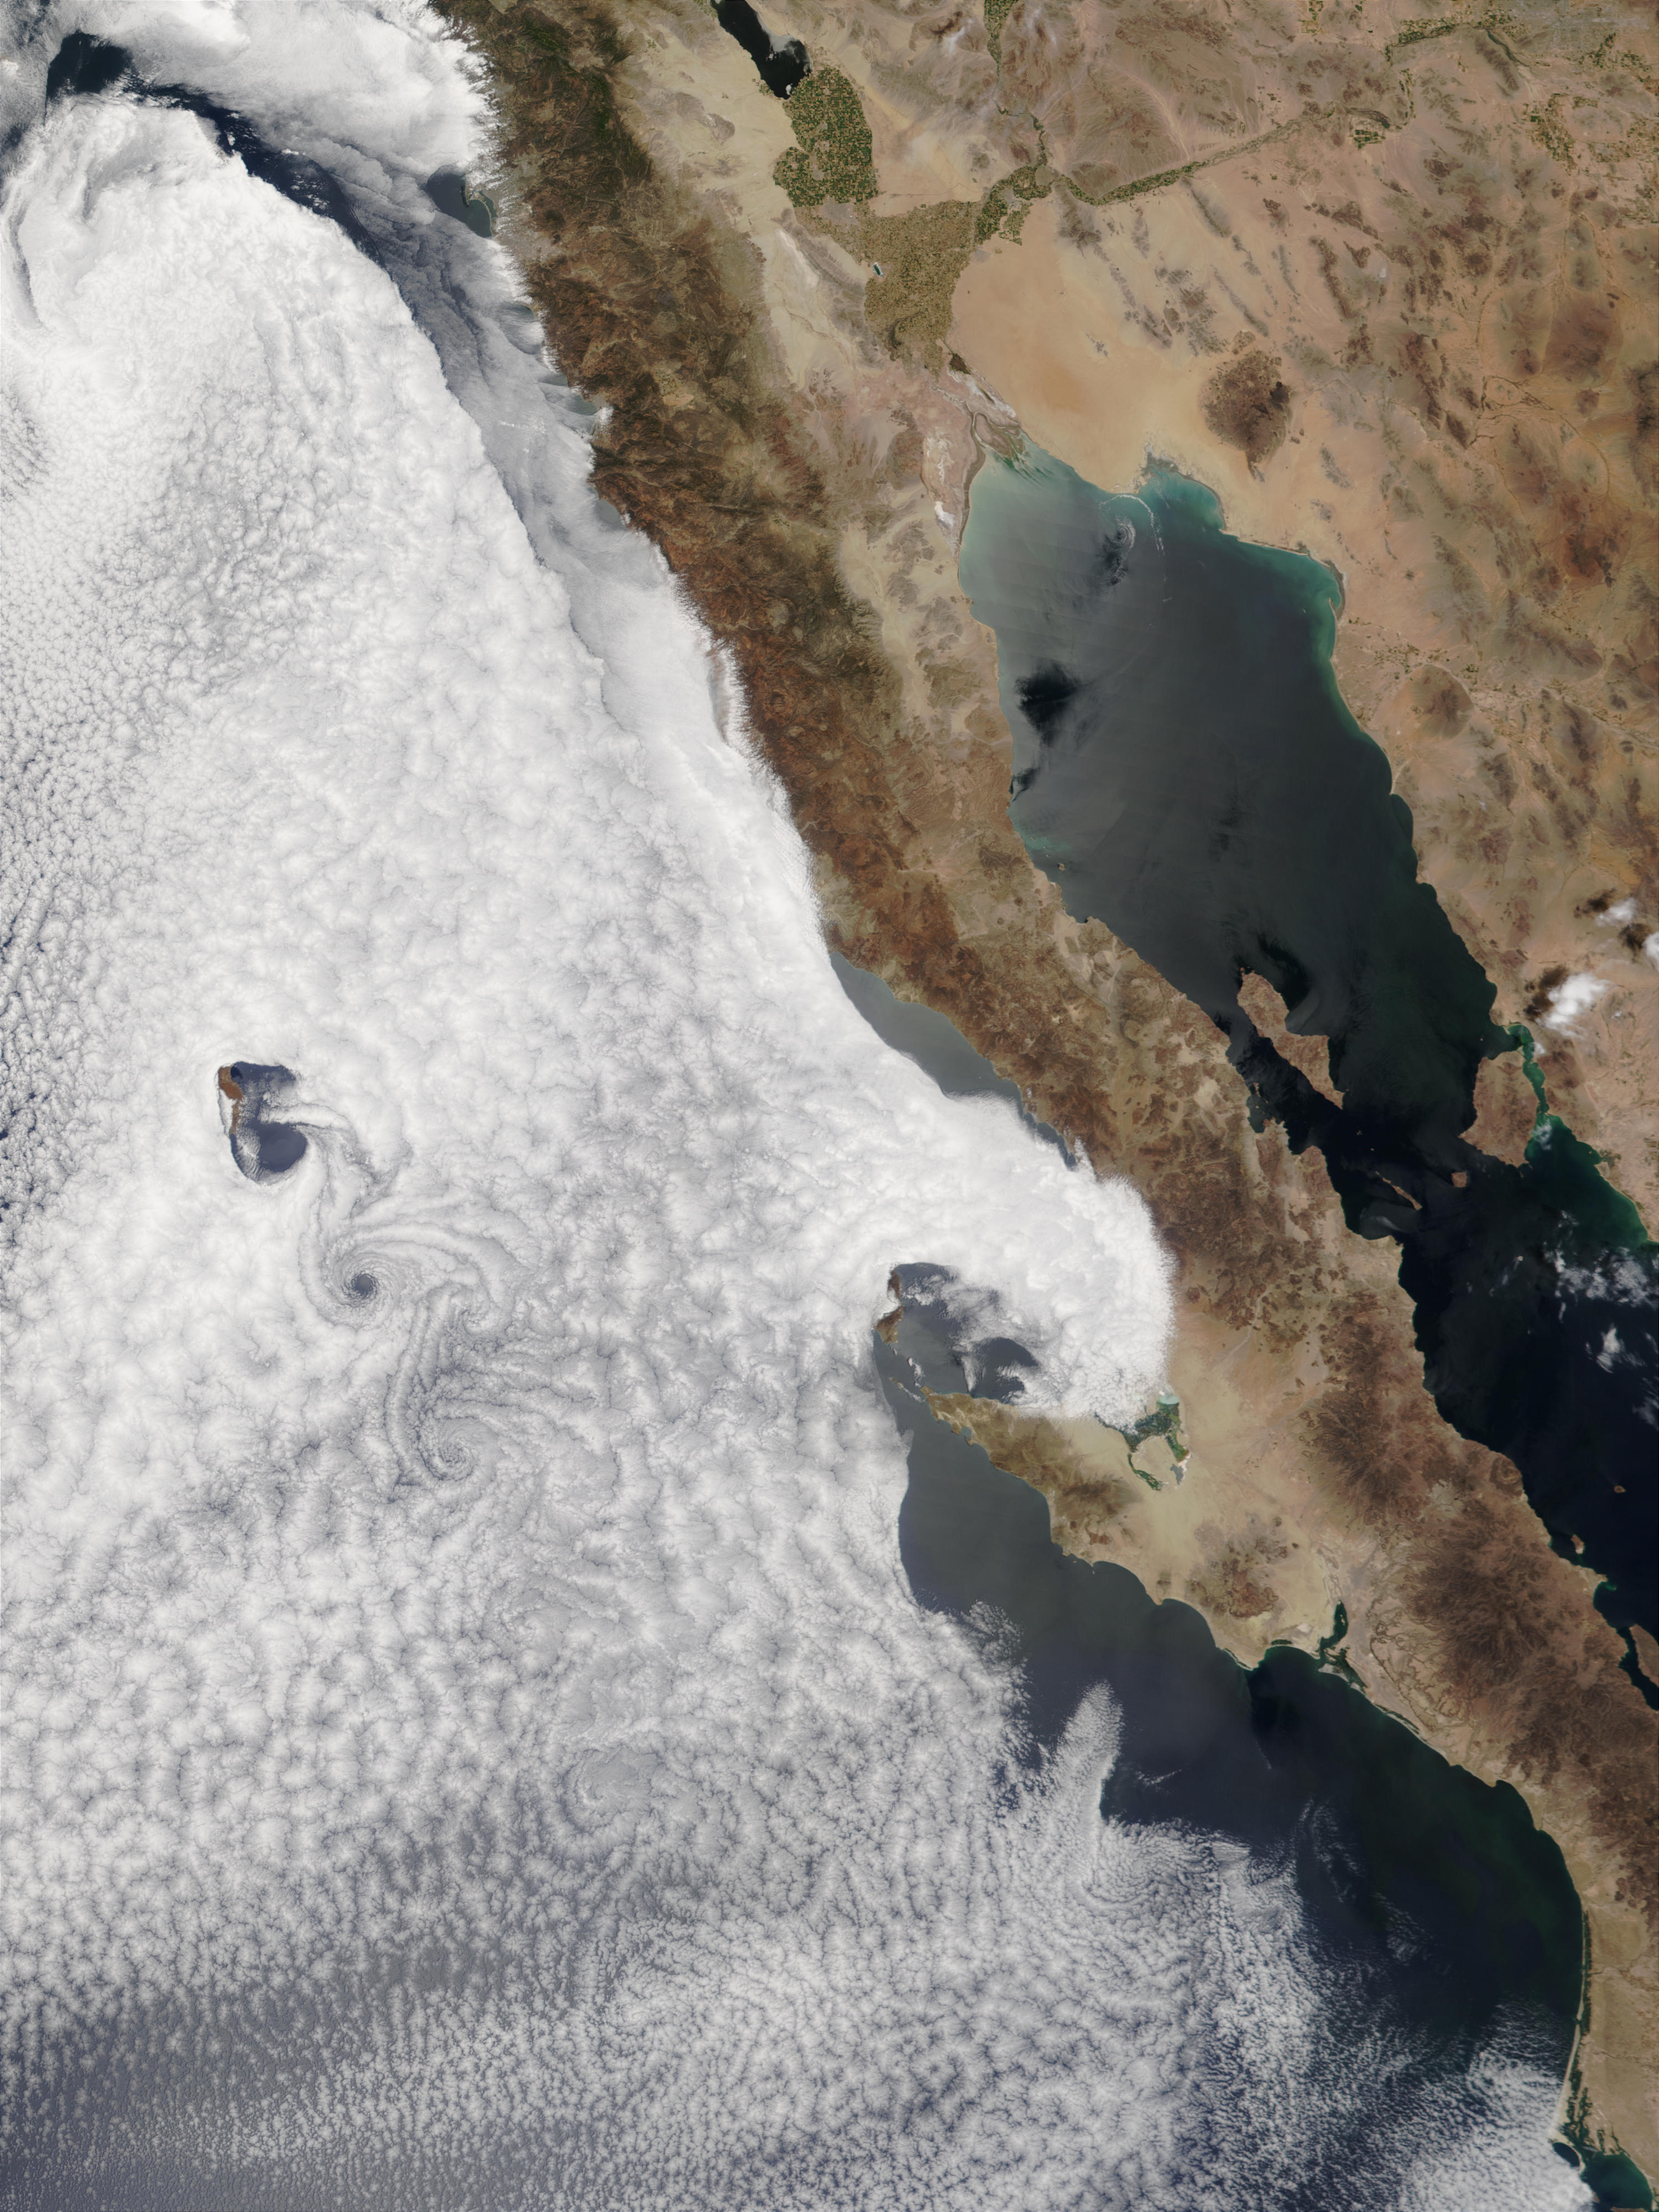 Vortex street off Baja California, Mexico - related image preview